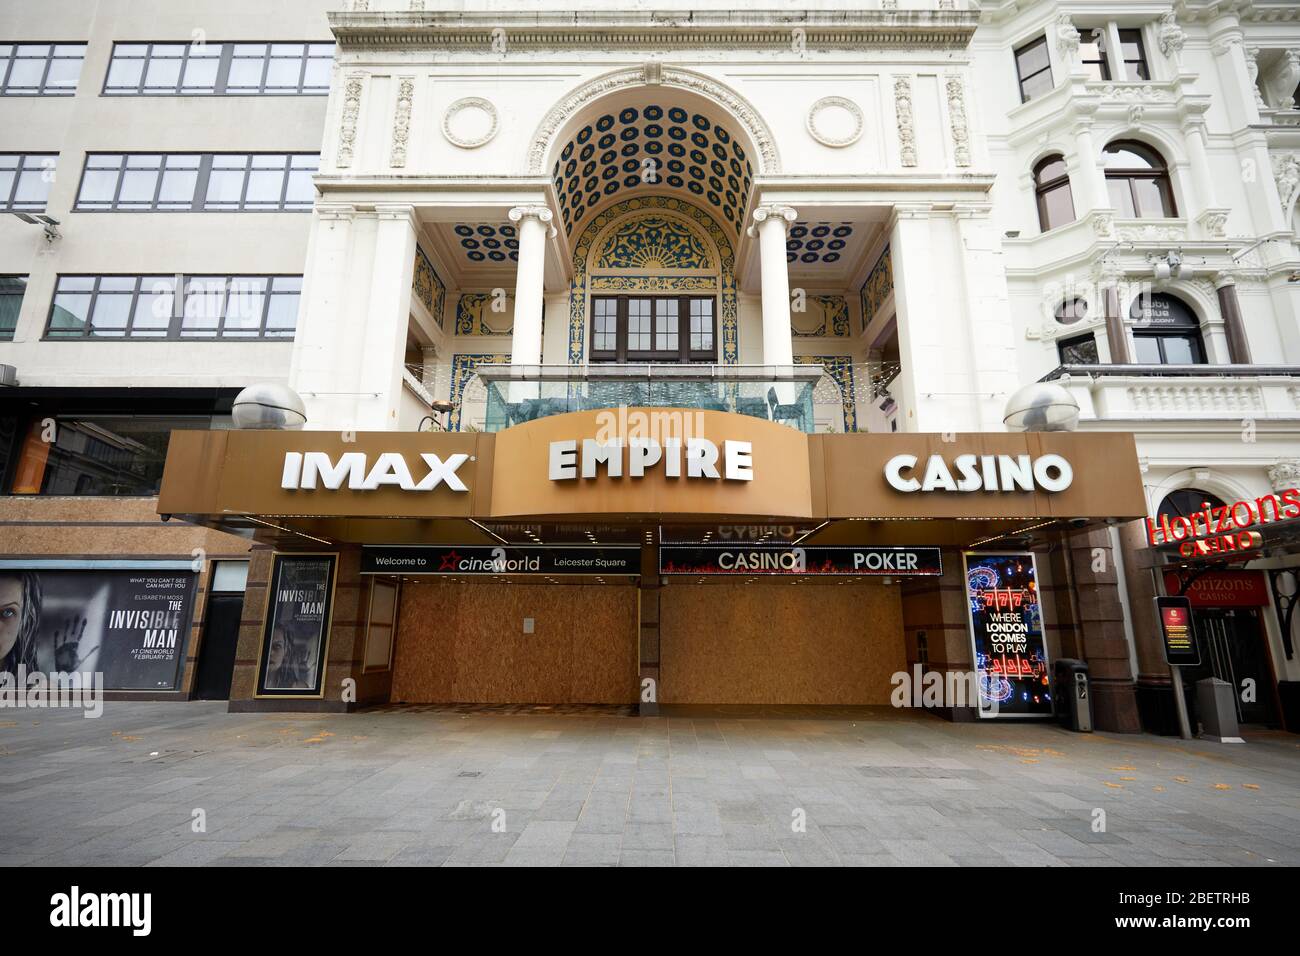 London, U.K. - 13 Apr 2020: The entrance of the Empire Leicester Square, which has been closed and boarded-up during the coronavirus lockdown. Stock Photo